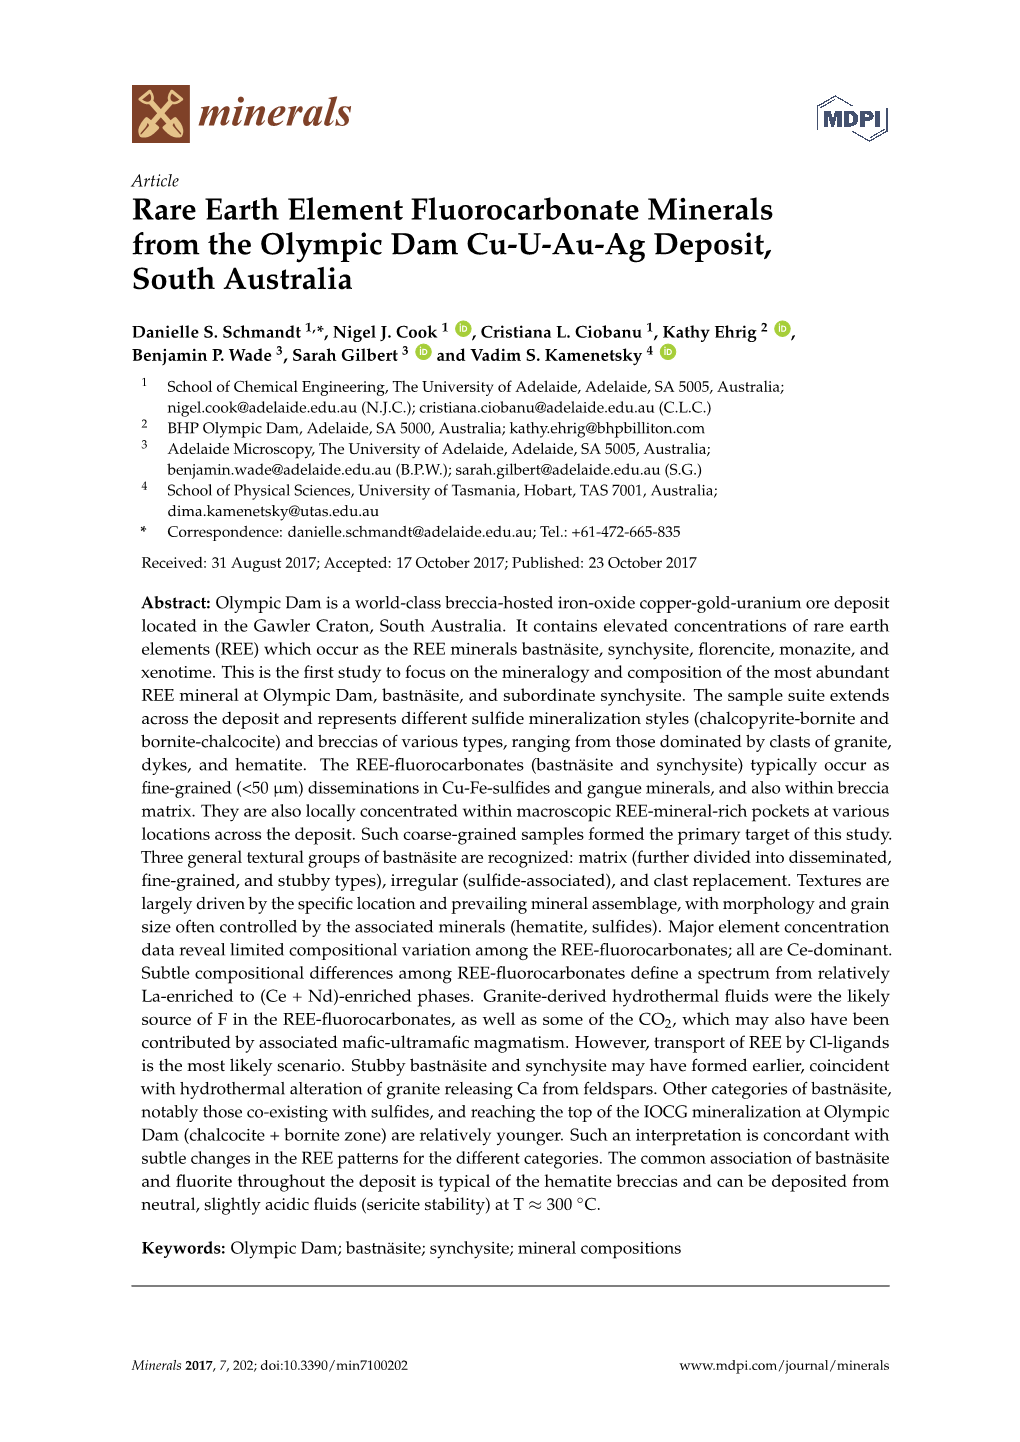 Rare Earth Element Fluorocarbonate Minerals from the Olympic Dam Cu-U-Au-Ag Deposit, South Australia